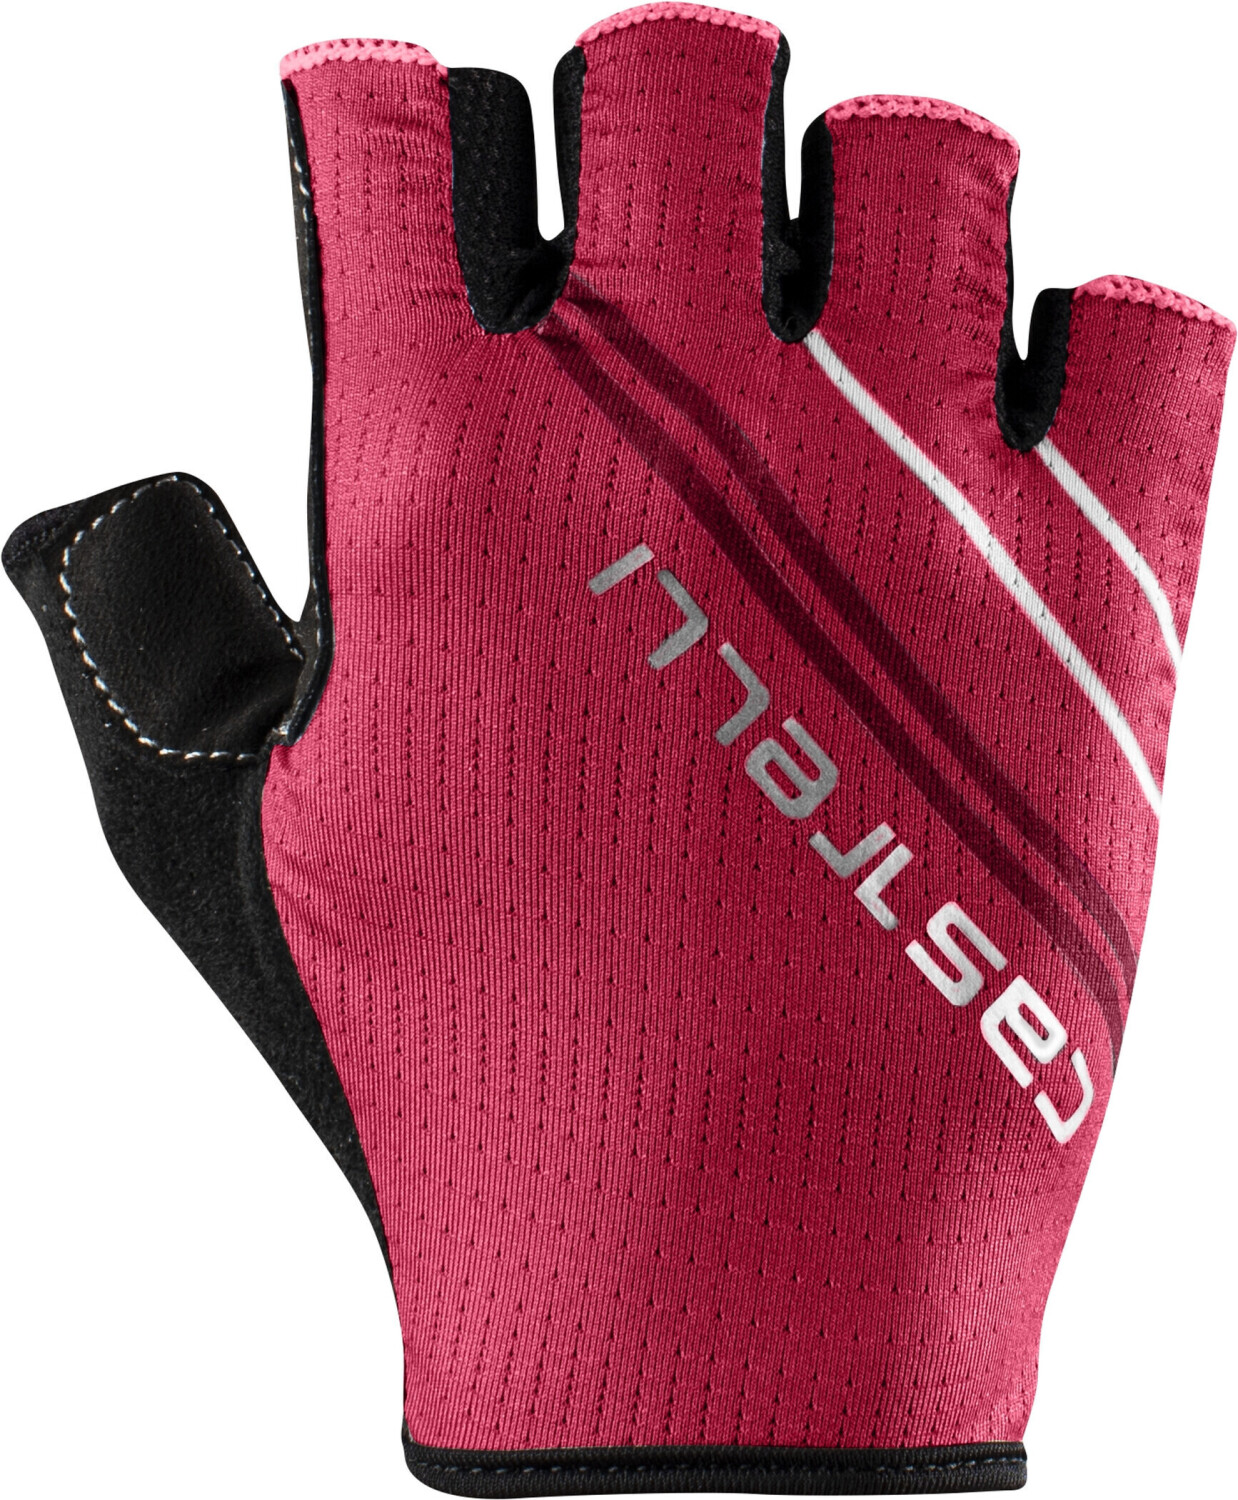 Photos - Cycling Gloves Castelli Dolcissima 2 Woman glove persian red 